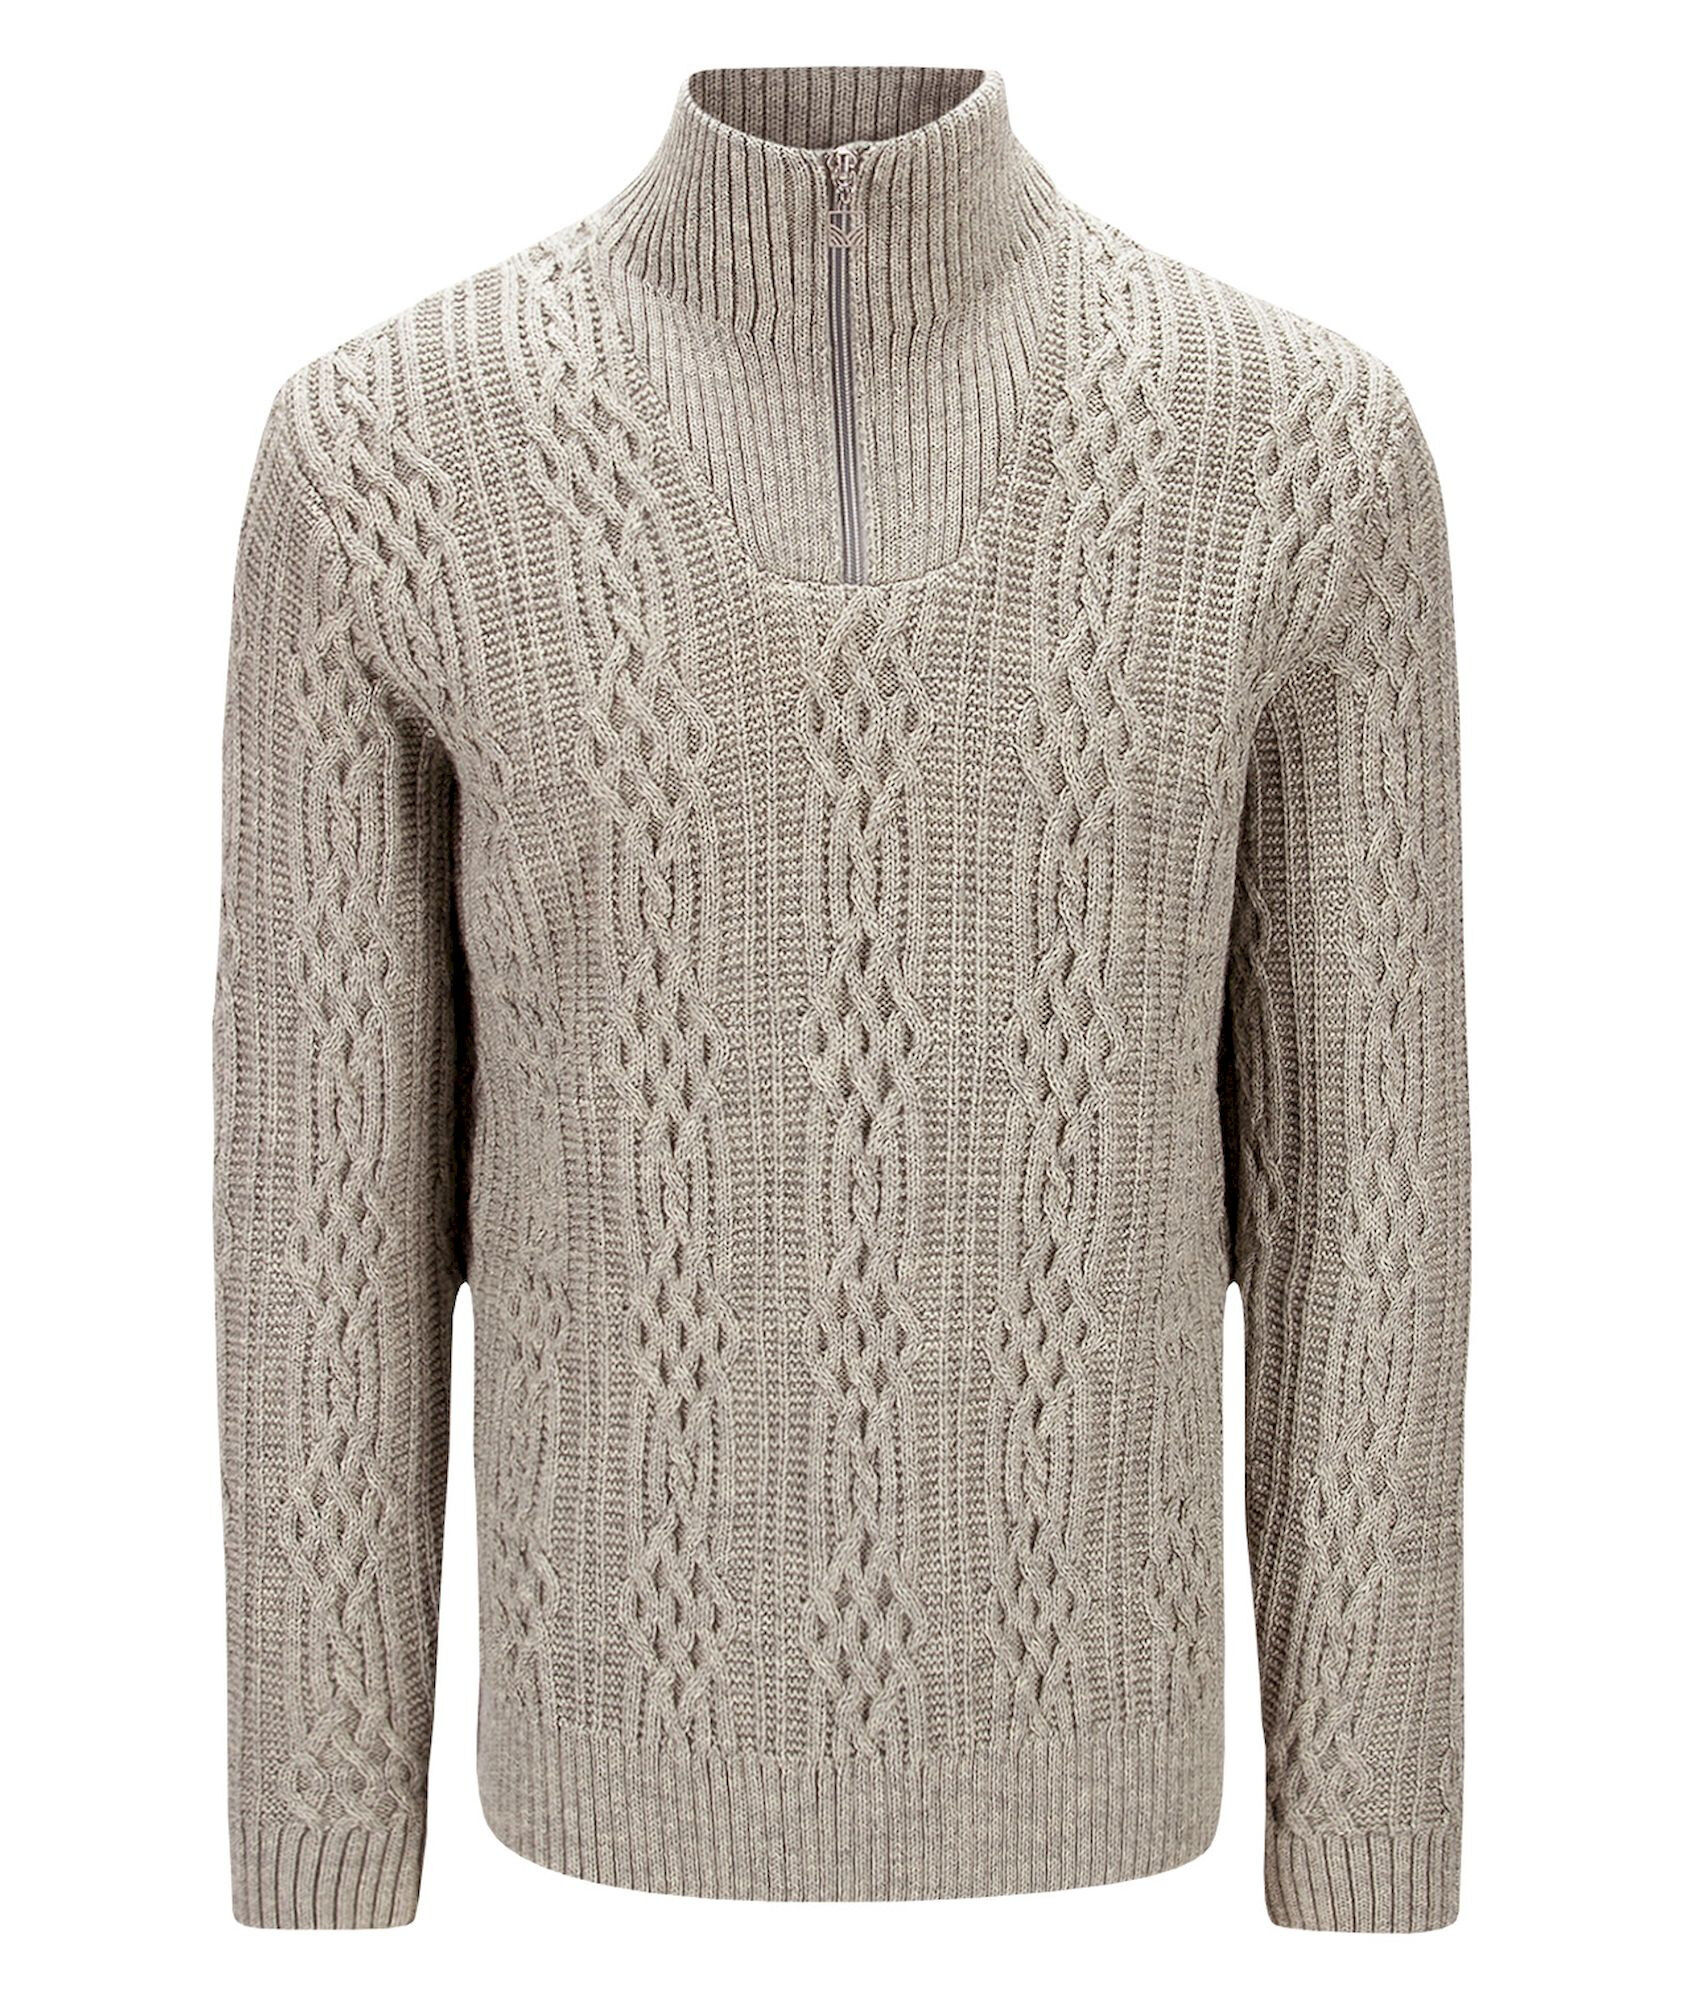 Dale of Norway Hoven Sweater - Pánsky pullover | Hardloop